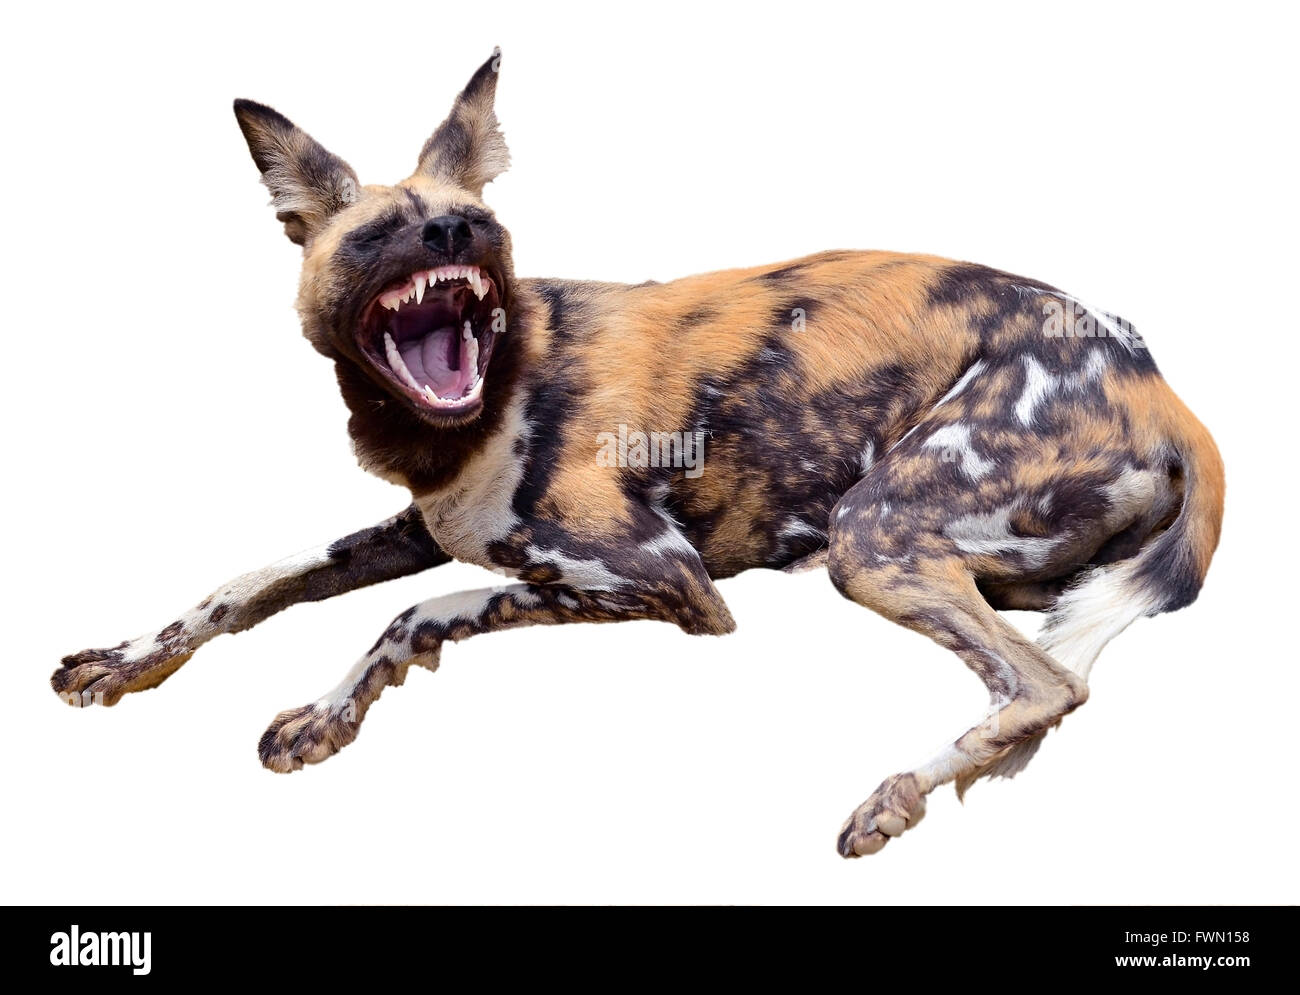 Isolated African Wild Dog showing its teeth Stock Photo